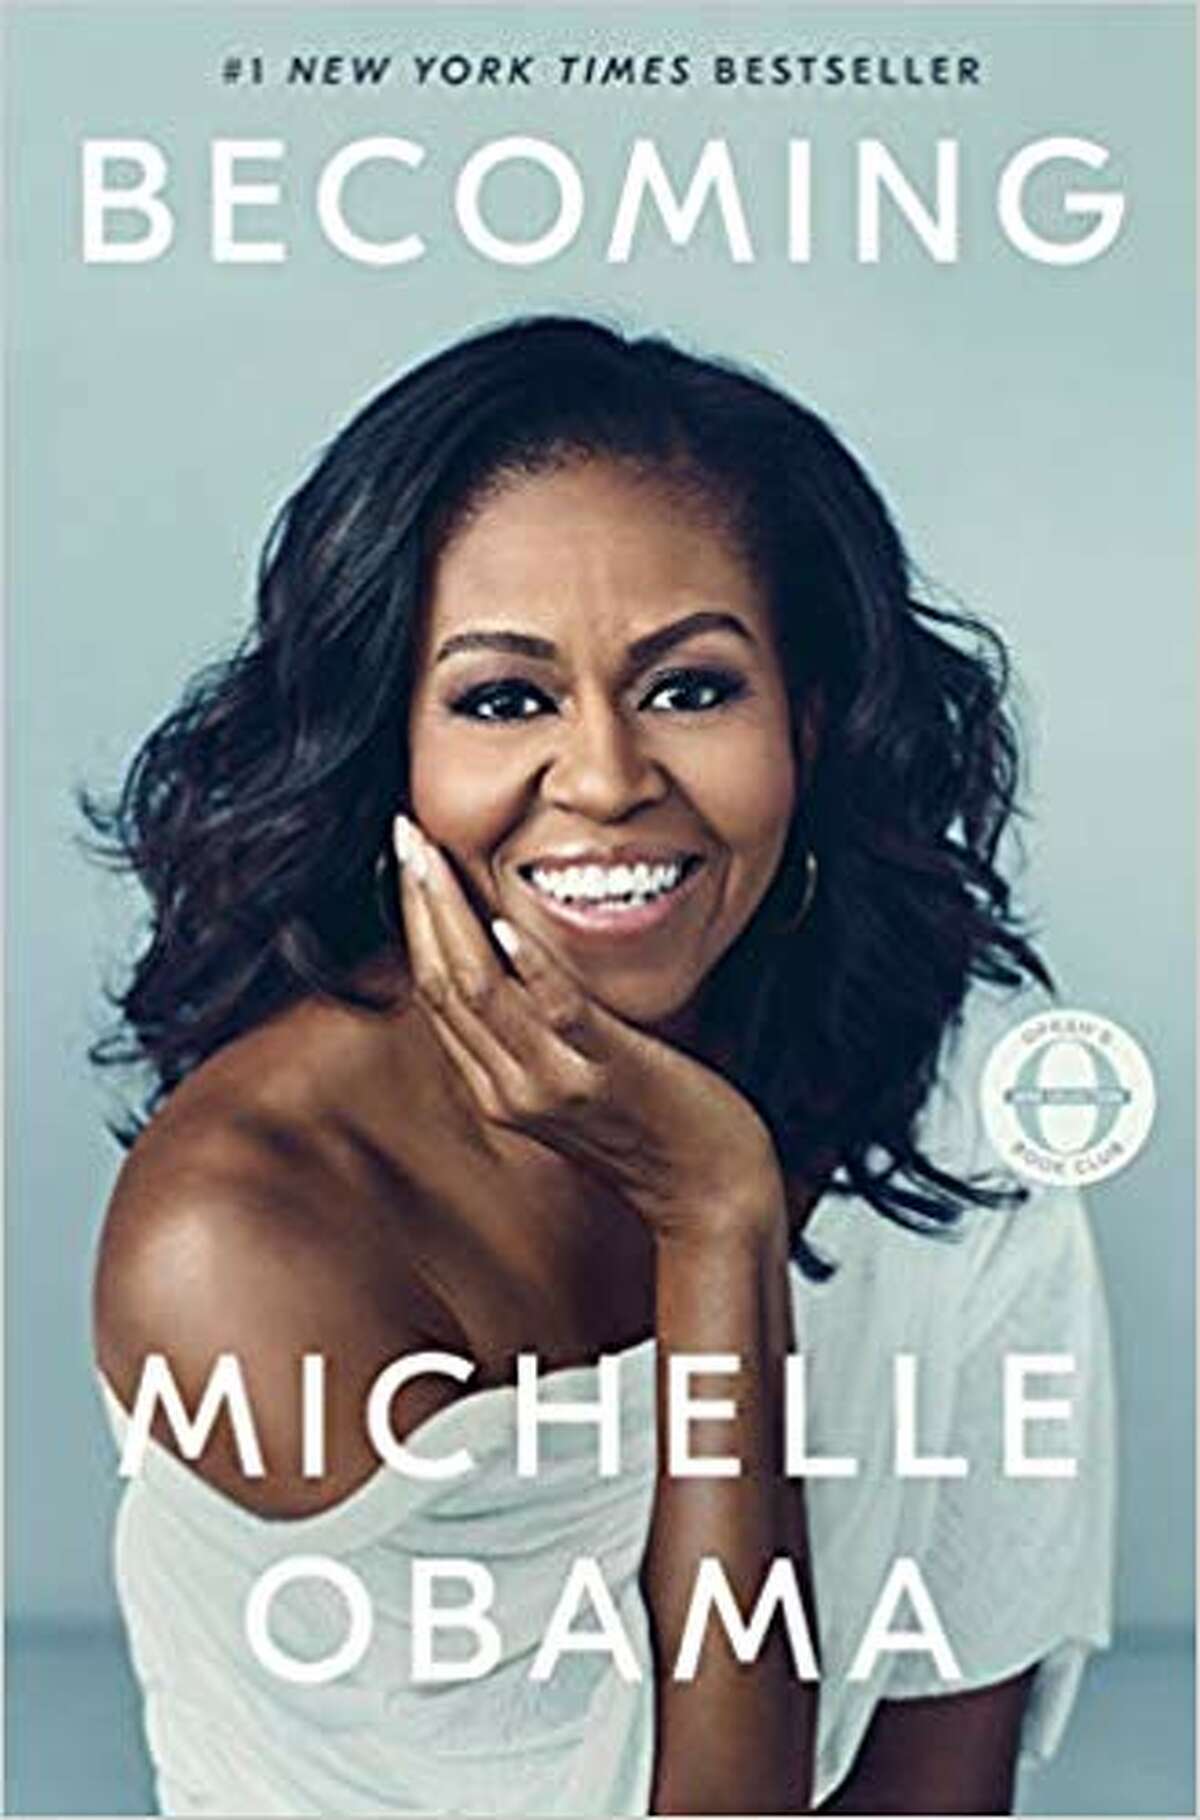 Michelle Obama is America's most admired woman in Gallup's annual survey.  The ex-first lady's autobiography Becoming is still near the top of bestseller lists more than a year after publication.